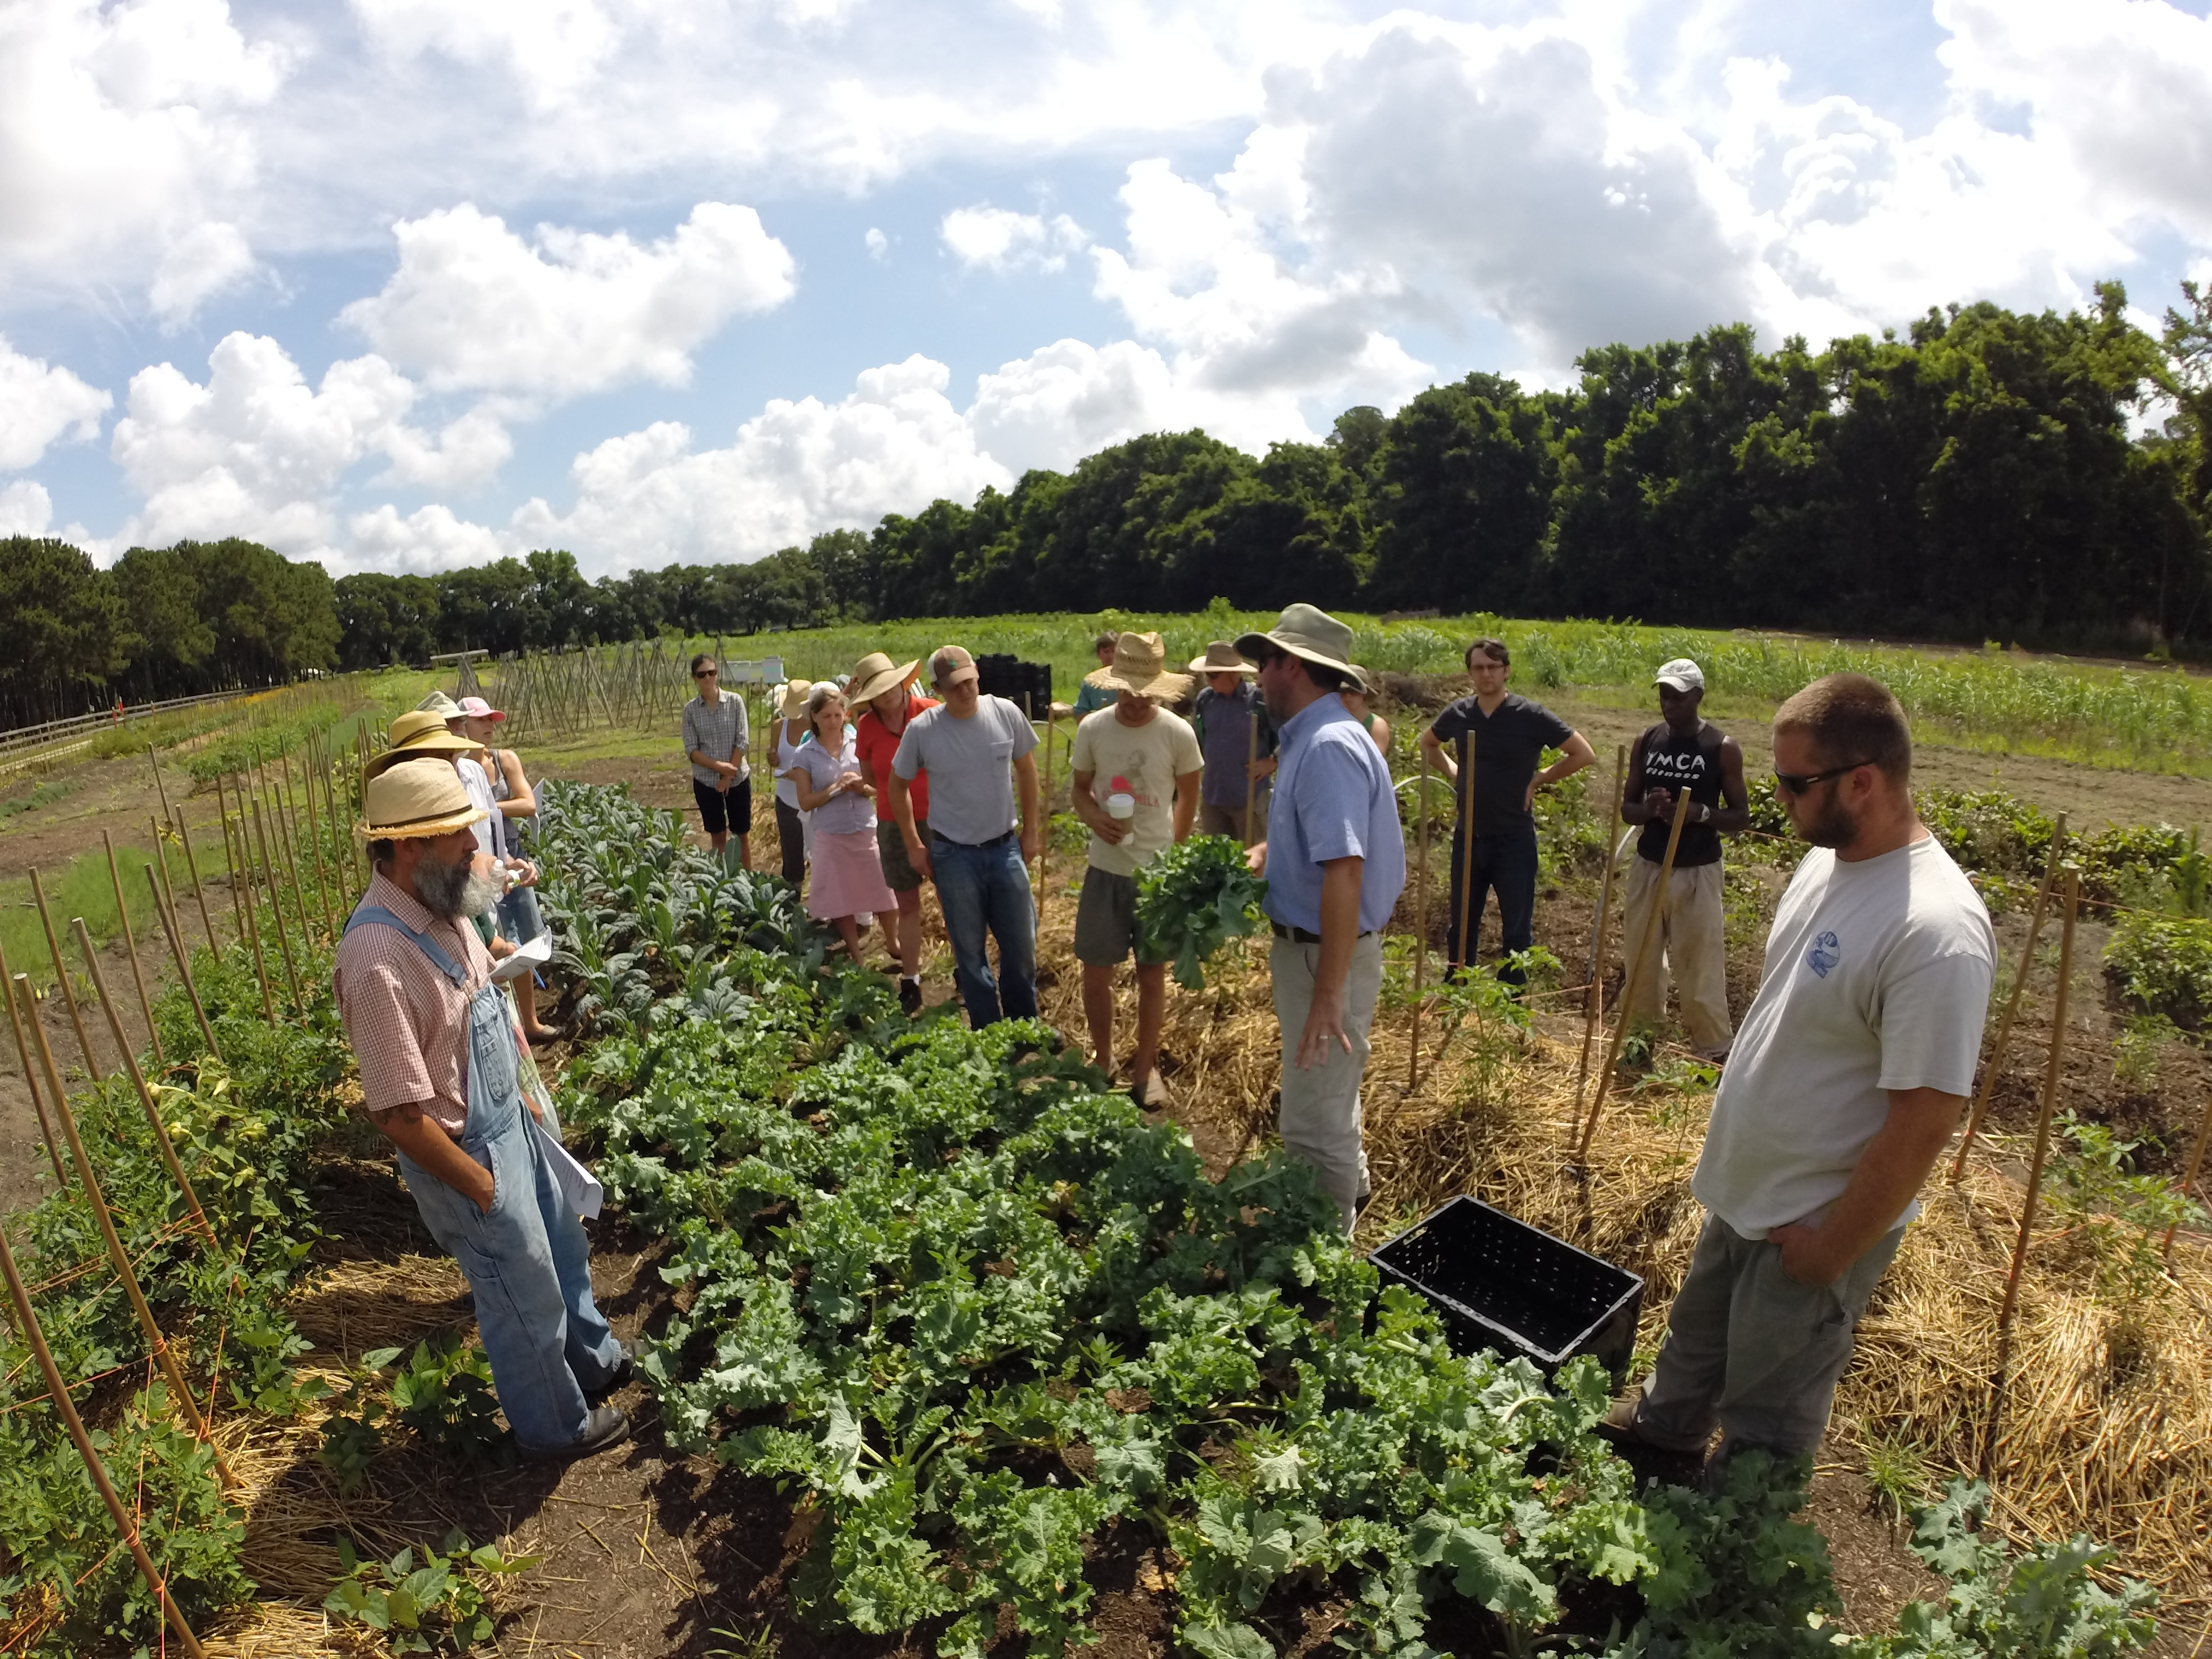 Dirt Works Incubator Farm: Building Land Access and Community in ...